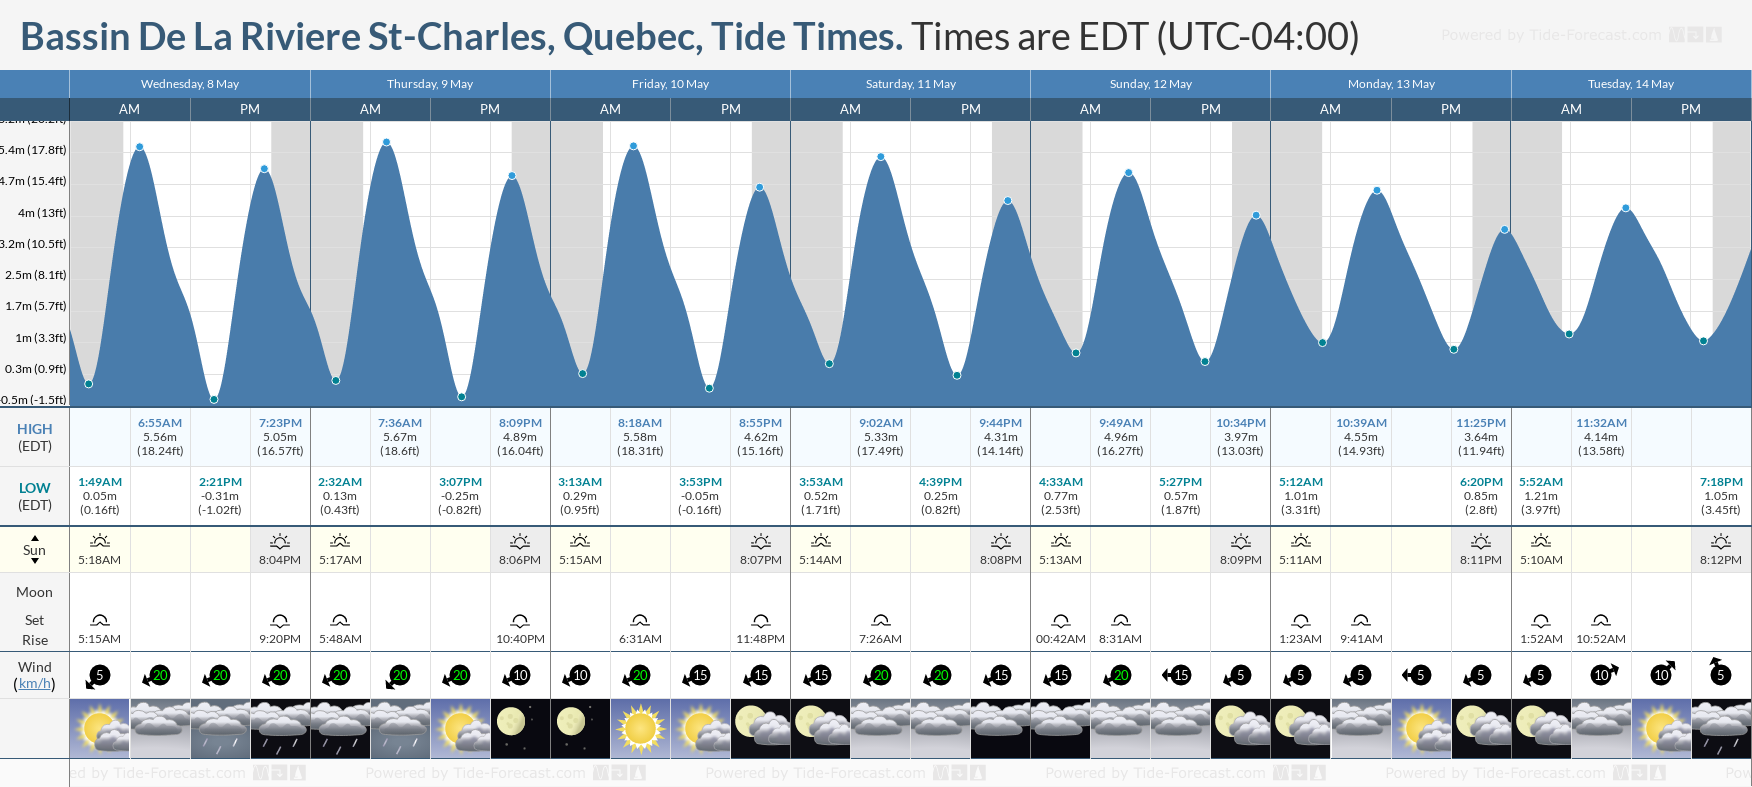 Bassin De La Riviere St-Charles, Quebec Tide Chart including high and low tide tide times for the next 7 days